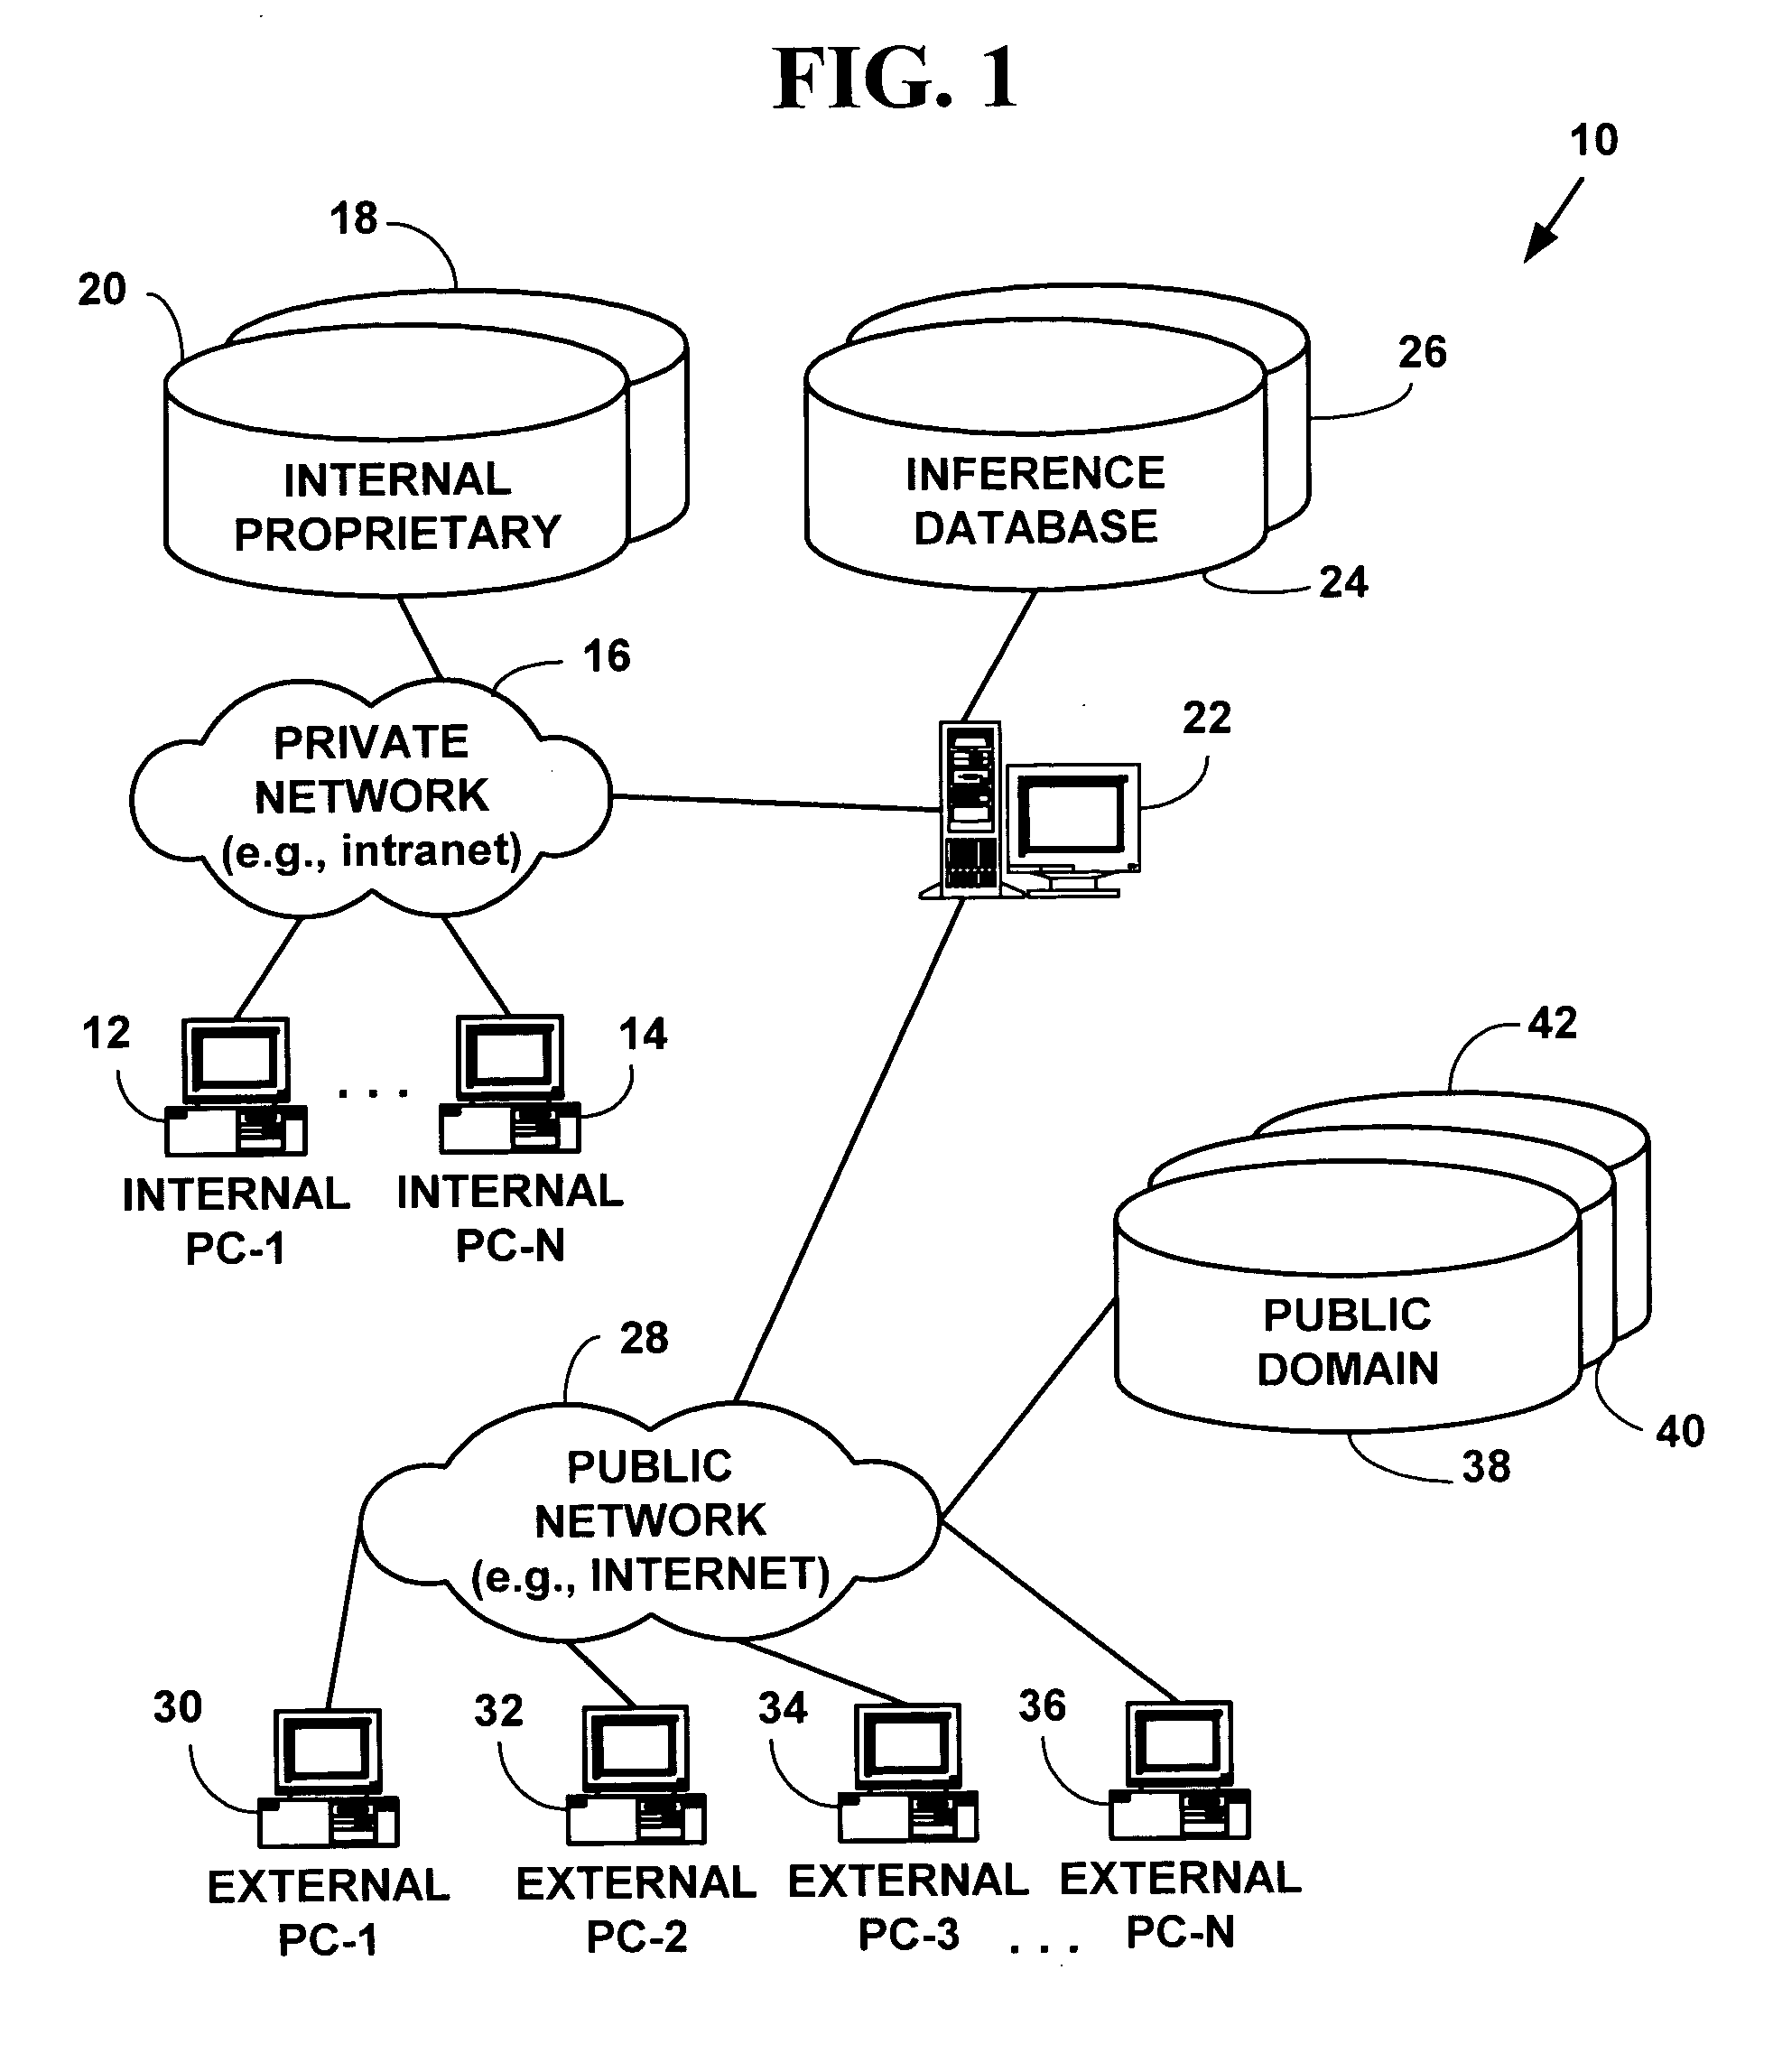 Method and system for automated inference creation of physico-chemical interaction knowledge from databases of co-occurrence data